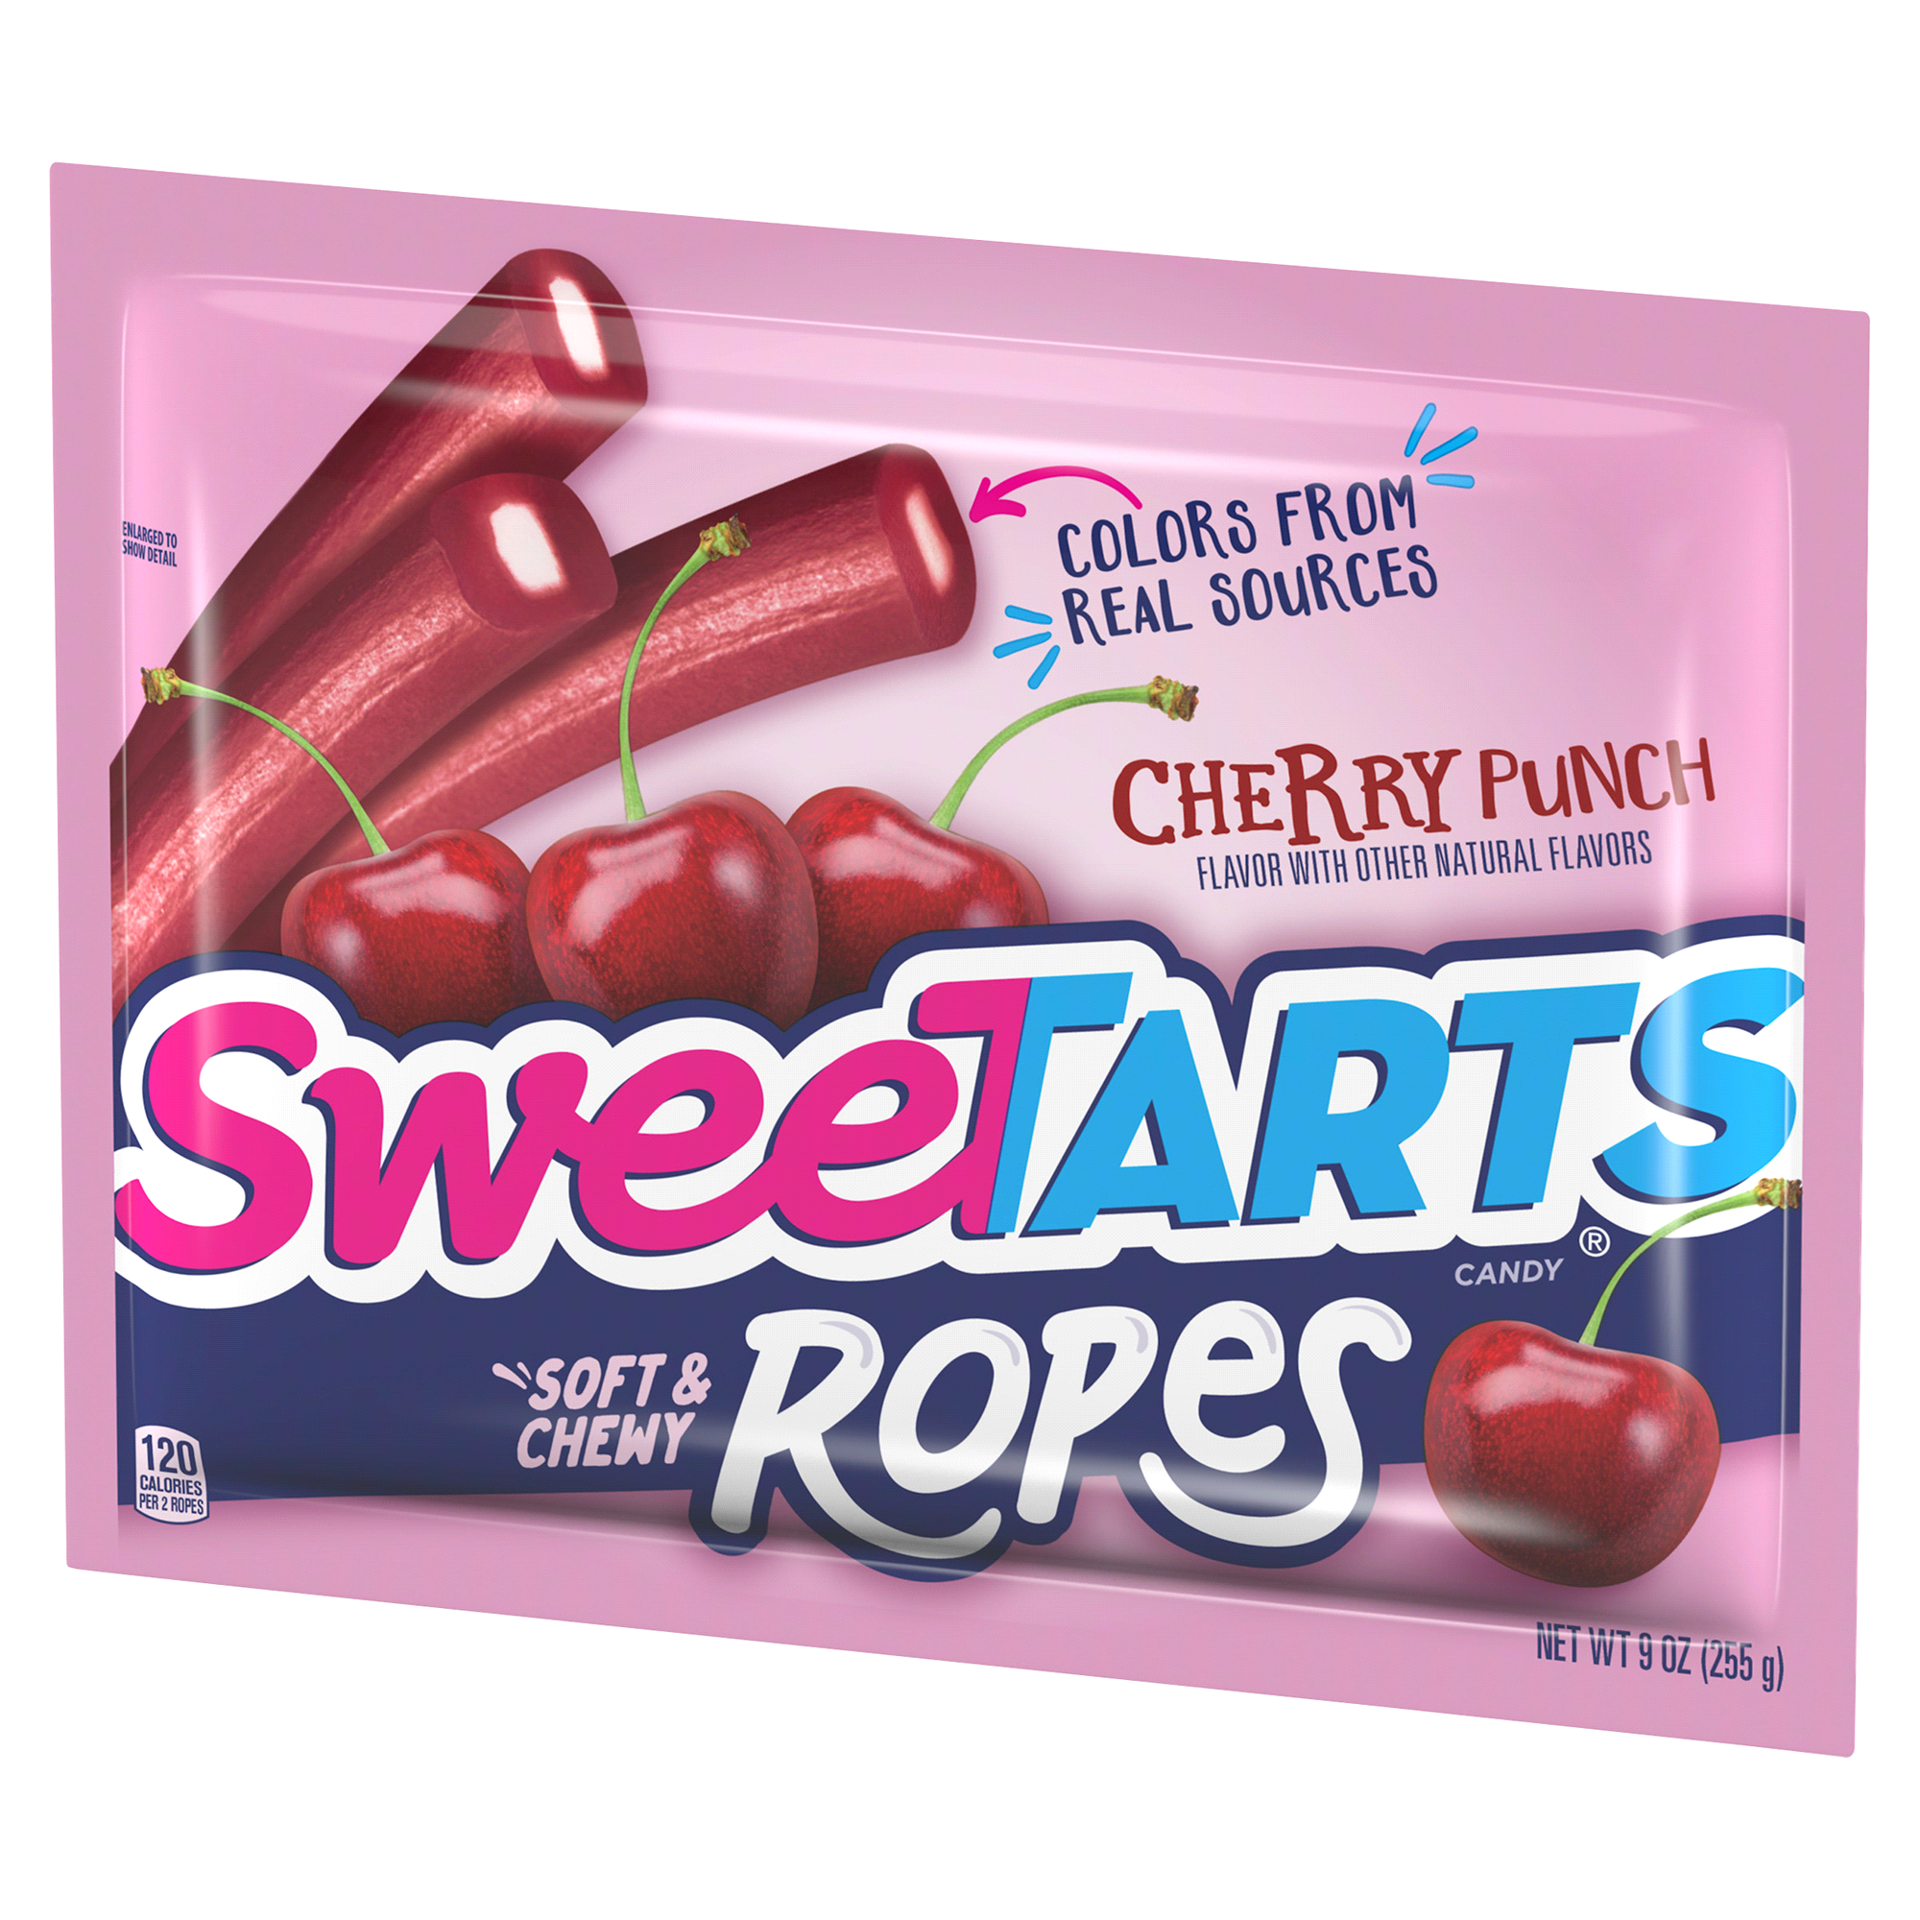 slide 6 of 29, SweeTARTS Cherry Punch Soft & Chewy Ropes Candy, 9 oz